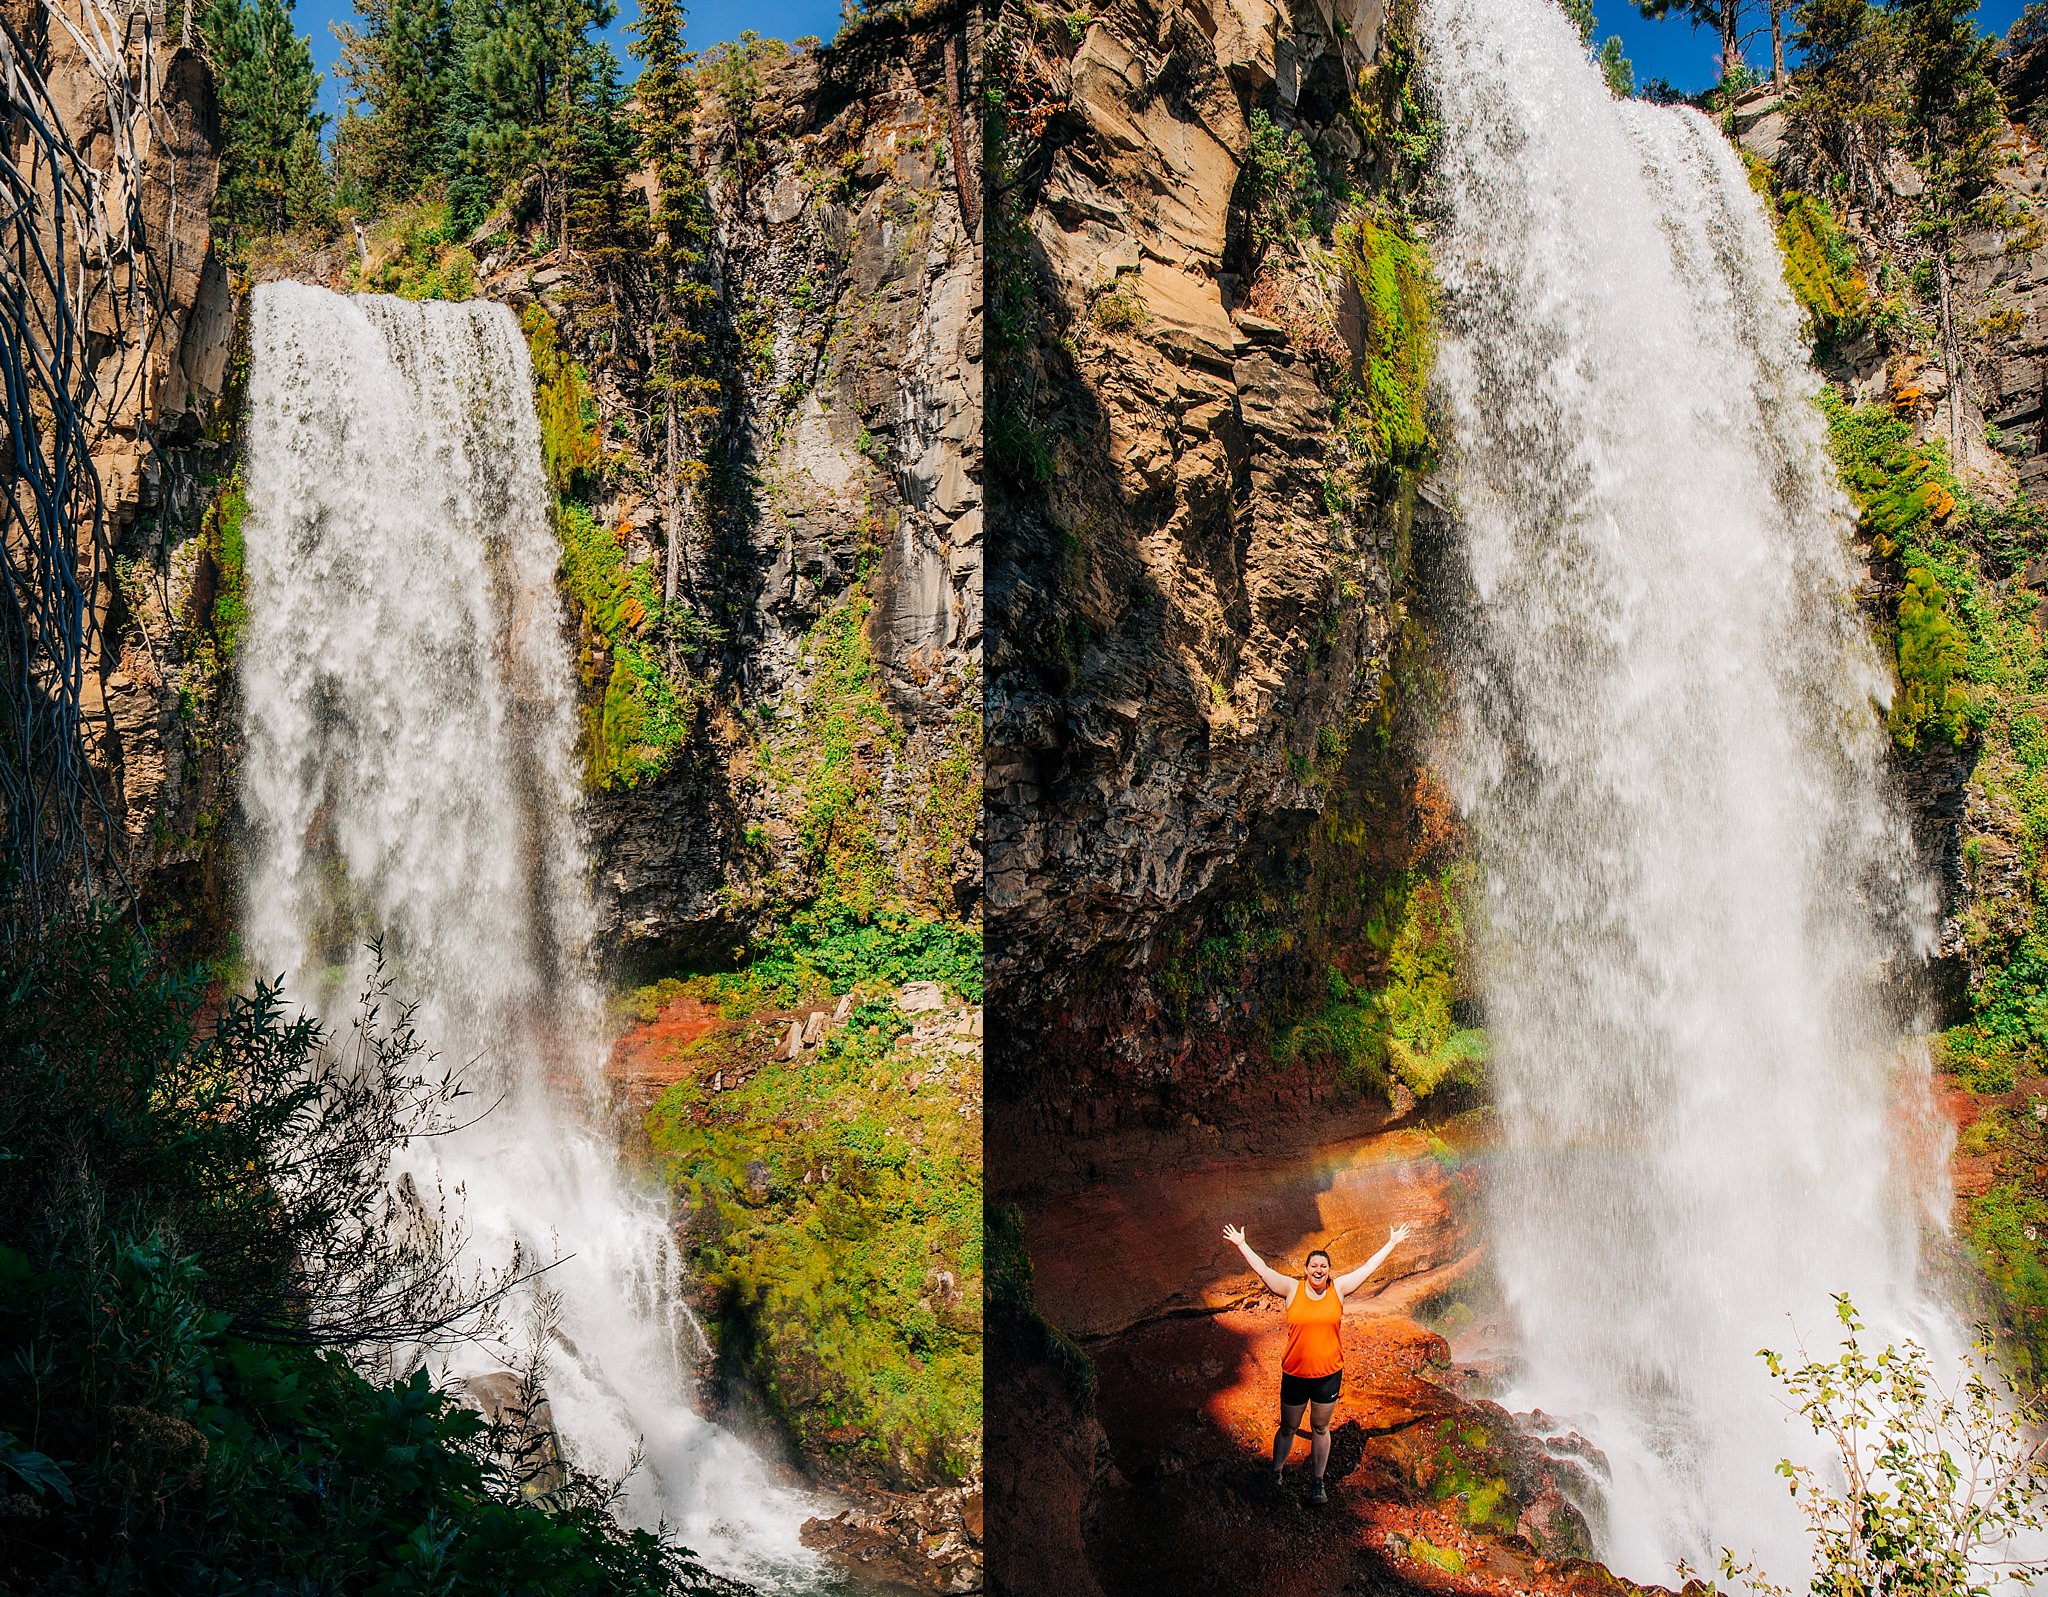 Adventure Central Oregon,Avid Cider,Bend,Central Oregon,Crater Lake,Kayak,Oregon,Painted Hills,Smith Rock,Sparks Lake,Things to do in bend,Tumalo Falls,